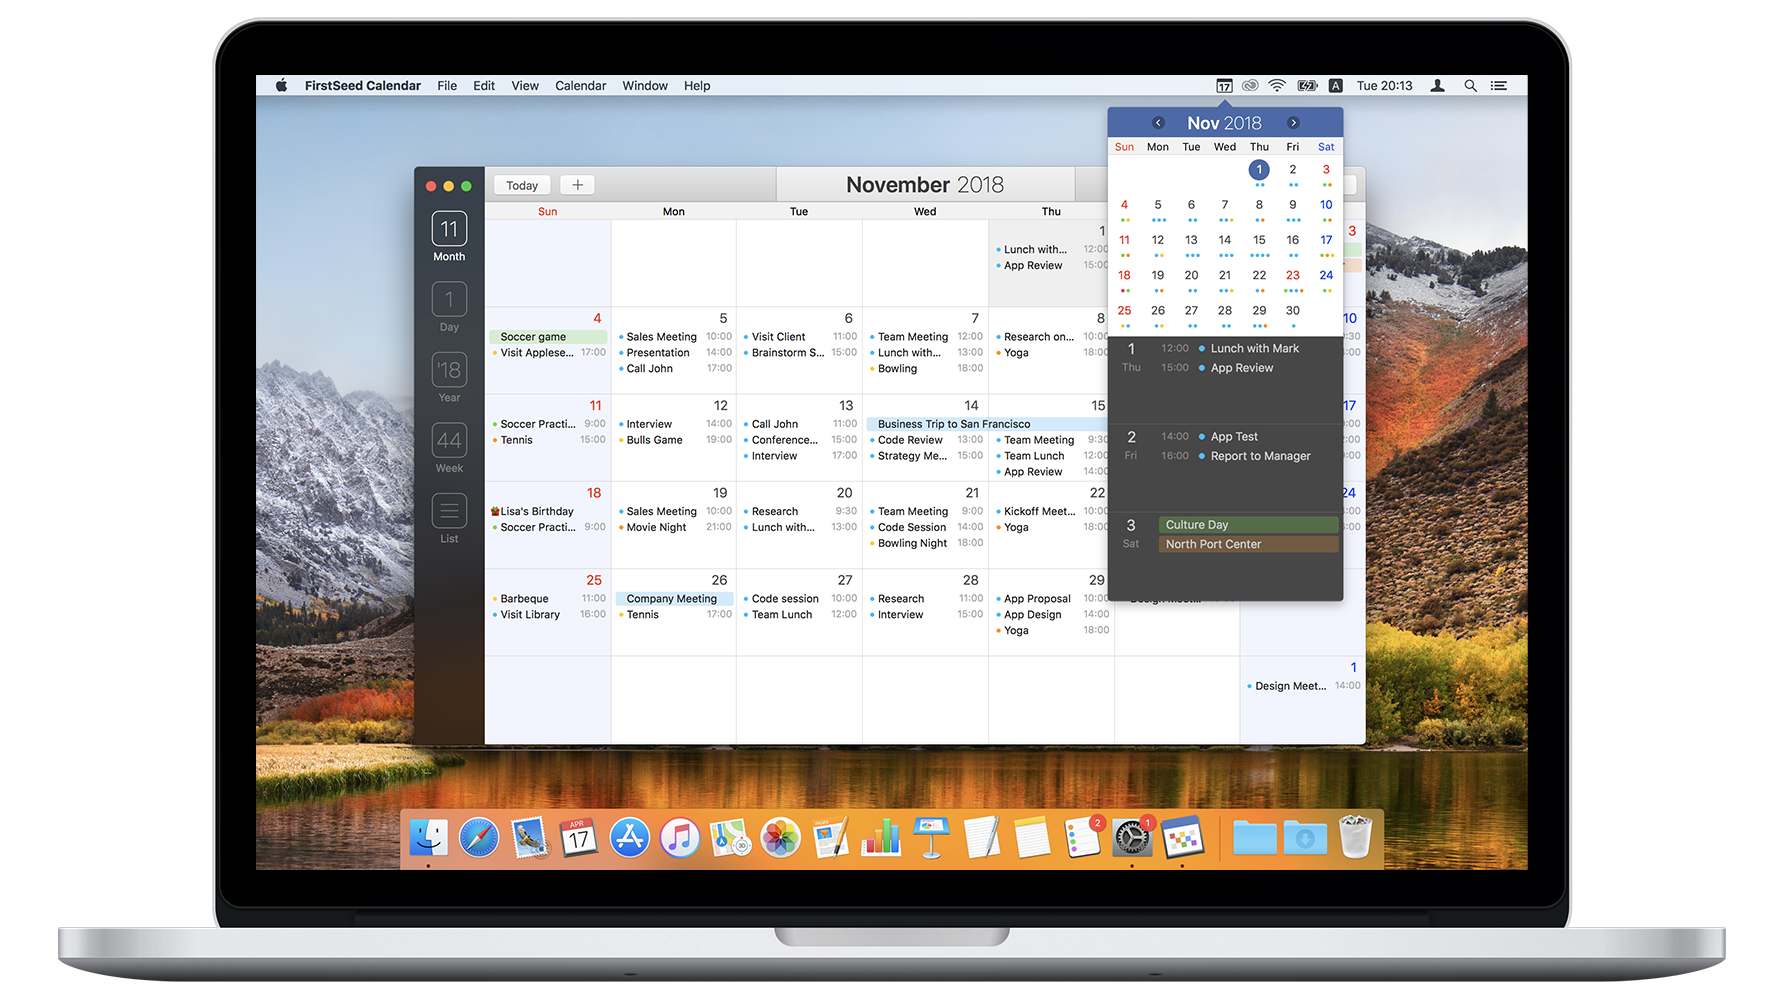 FirstSeed Calendar for Mac is available on the Mac App Store